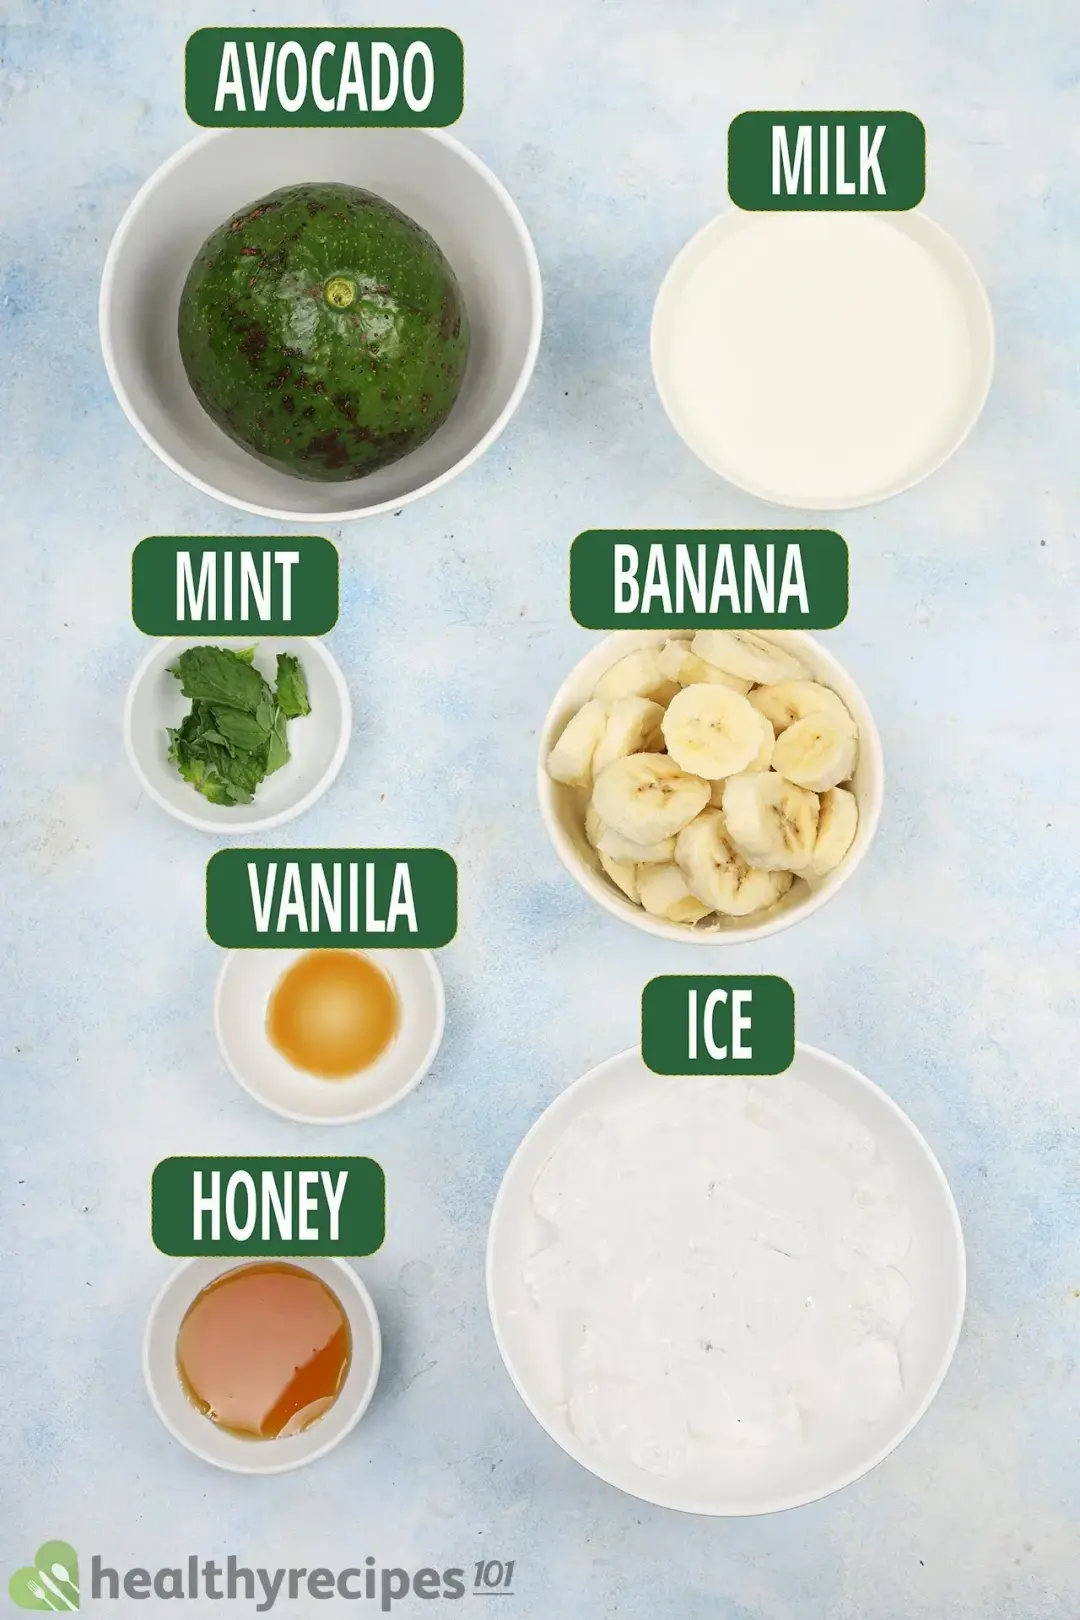 Ingredients for Avocado Banana Smoothie